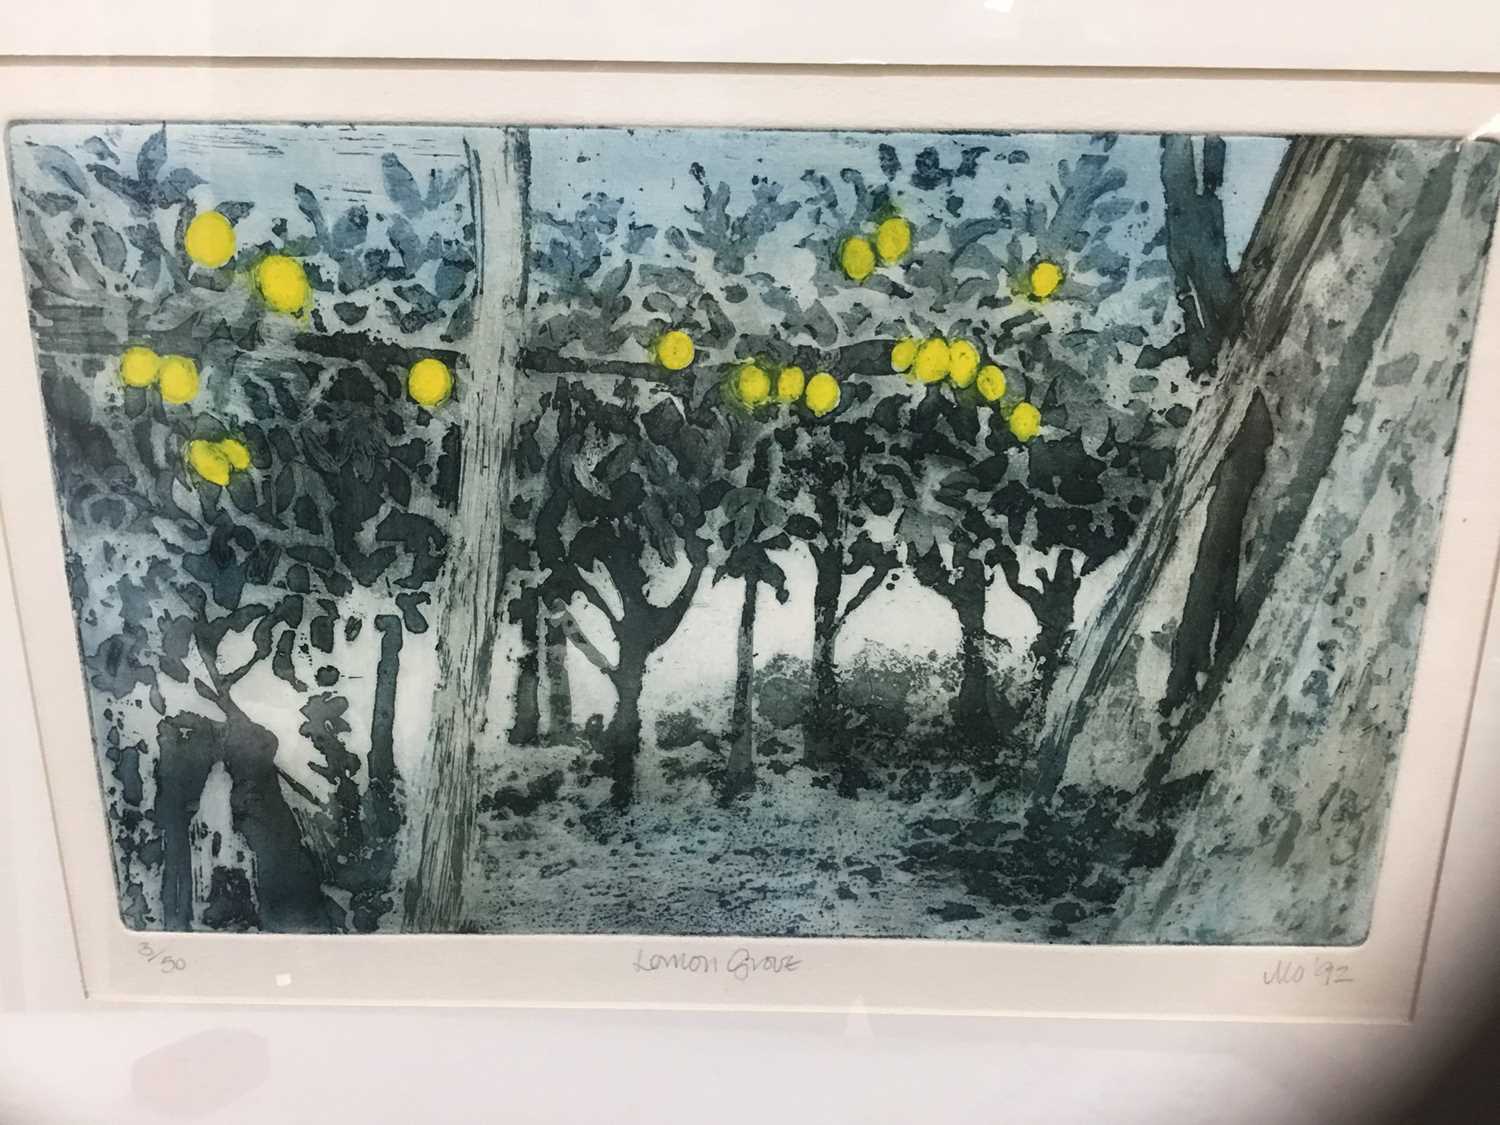 Lot 78 - MO (Contemporary) colour aquatint, lemon grove, signed dated '92, numbered 3/50, 19 x 30cm, glazed frame, together with a small watercolour indistinctly signed and numbered 10-10-9. (2)